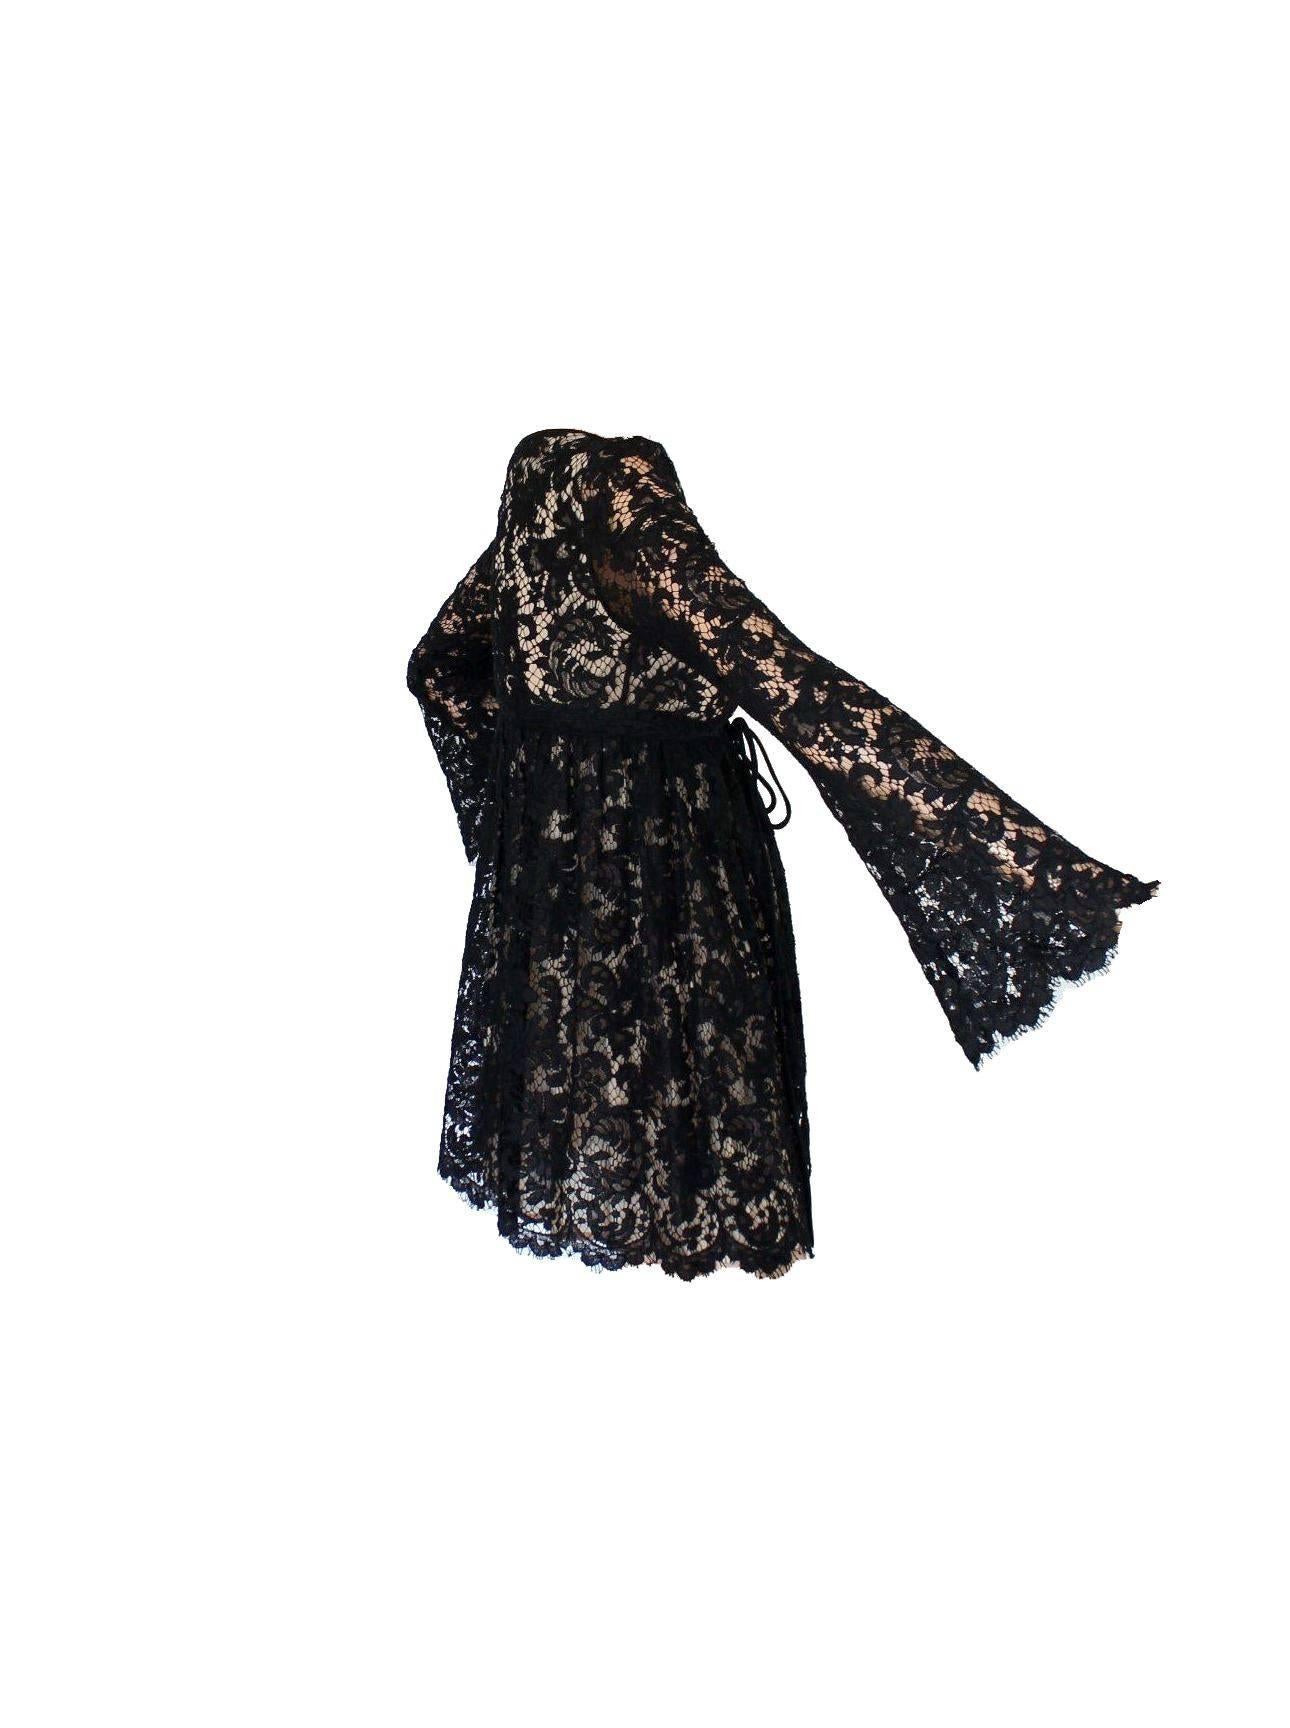 Stunning Gucci by Tom Ford lace dress
From his SS 1996 collection for Gucci
Finest black lace
Fully lined with nude silk

Made in Italy
Dry Clean Only
Size 38

Seen in the AD campaign and on the runway show for season reference only